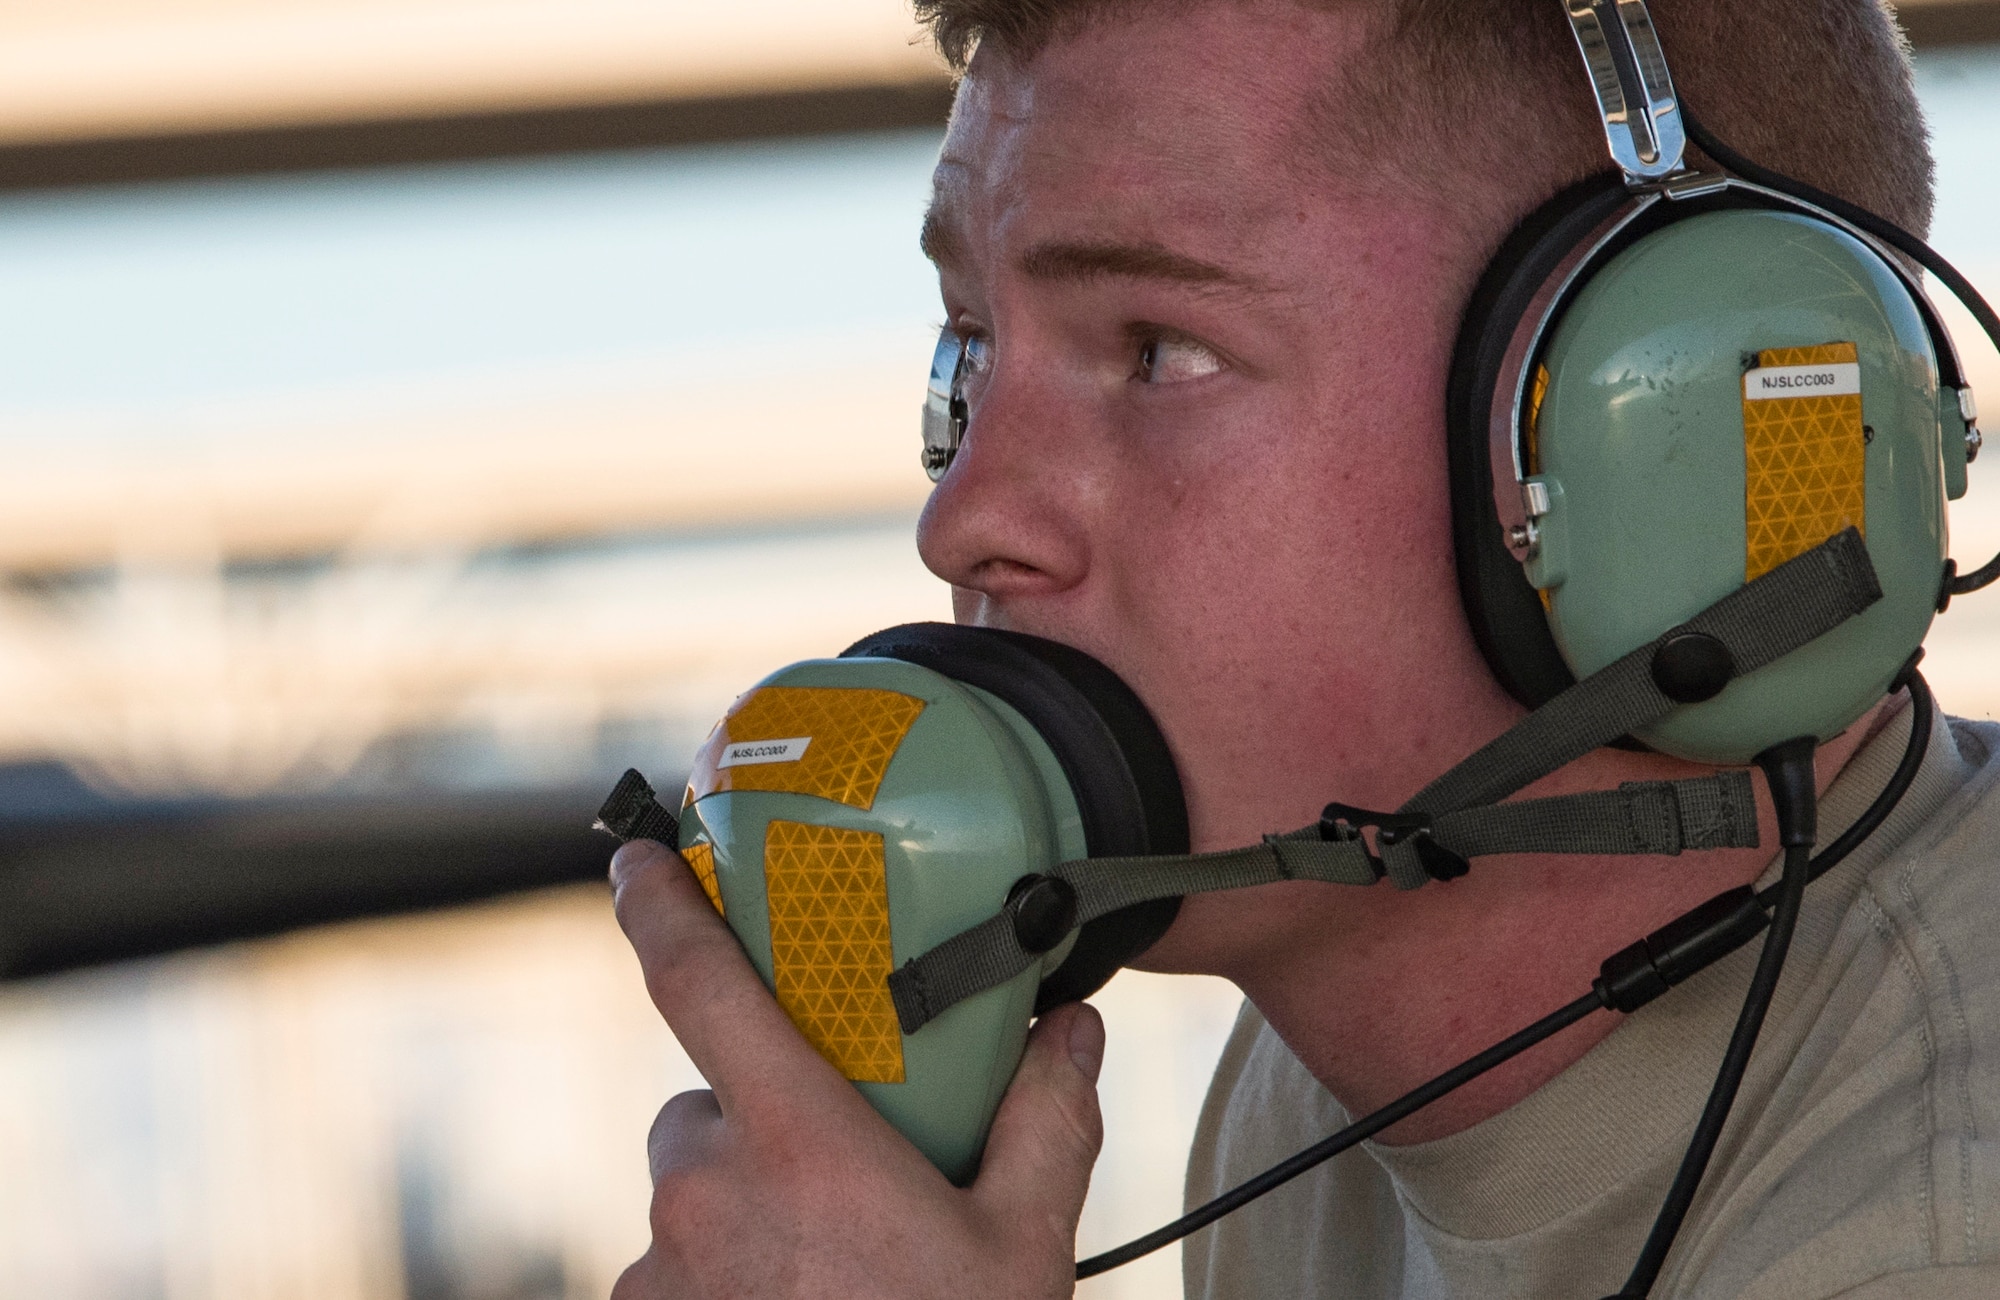 Airman 1st Class Chayce Ardoin, 57th Aircraft Maintenance Squadron Lightning Aircraft Maintenance Unit crew chief, talks into his headset at Nellis Air Force Base, Nevada, July 23, 2018. Crew chiefs use headsets to communicate to each other and the pilot, during pre- and post-flight checks. (U.S. Air Force photo by Airman 1st Class Andrew D. Sarver)